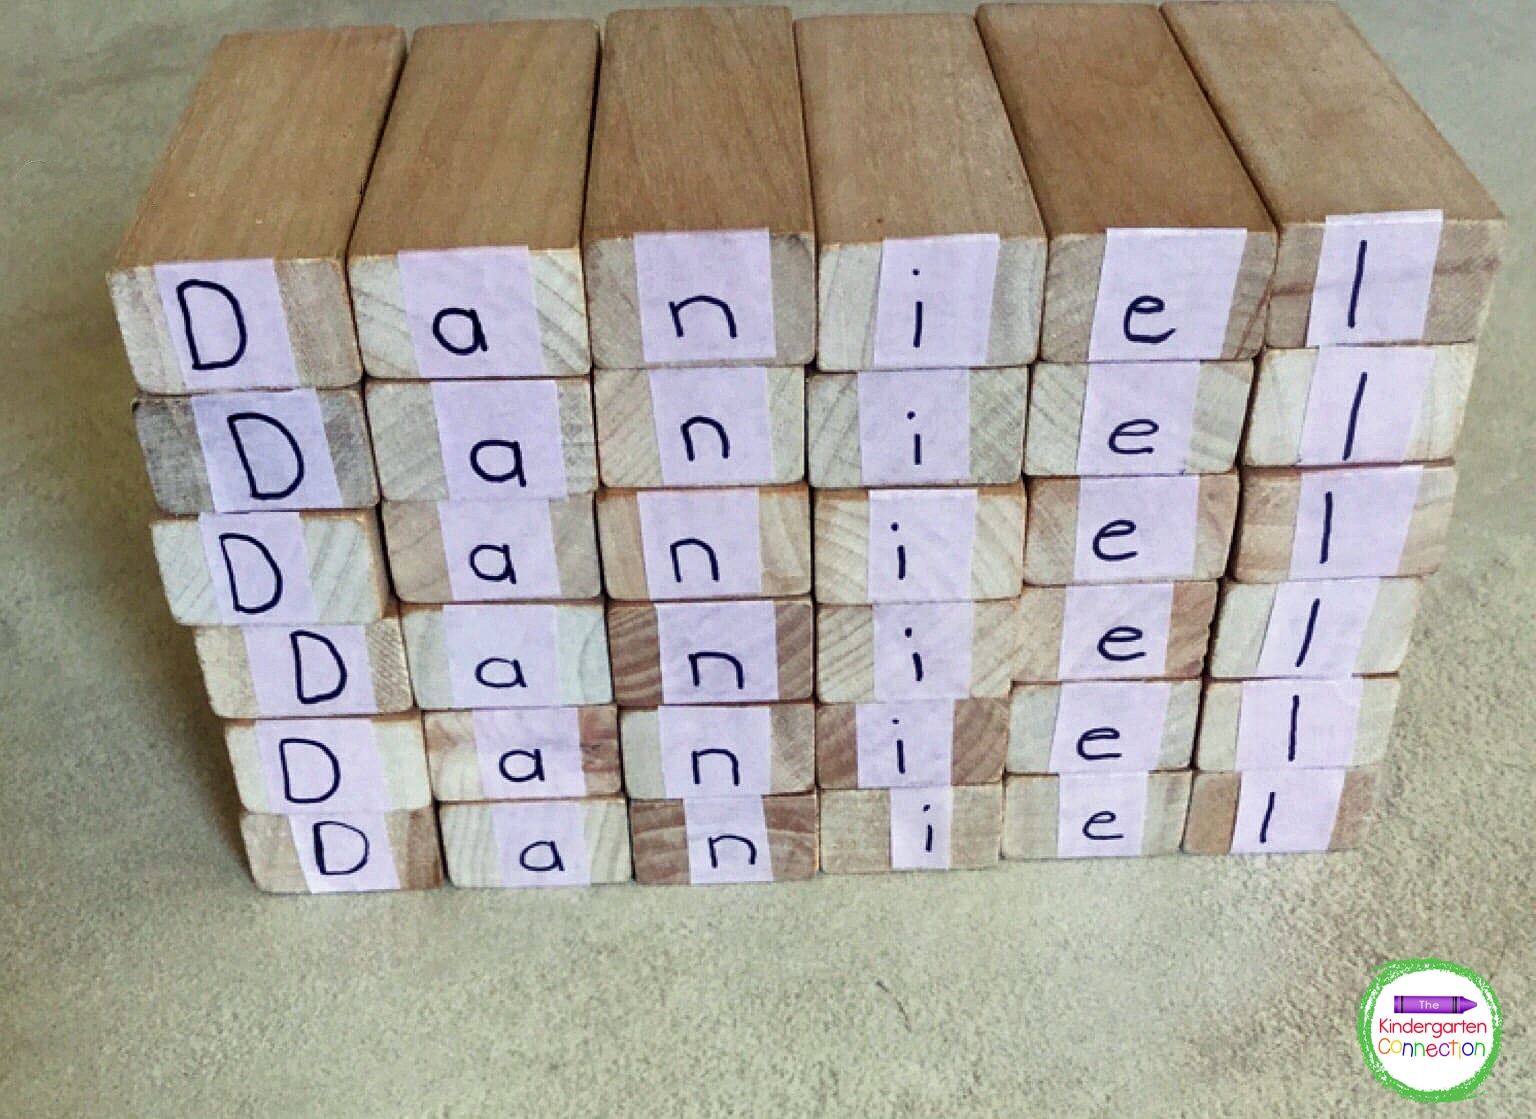 Students build their names using the blocks to create fun towers.